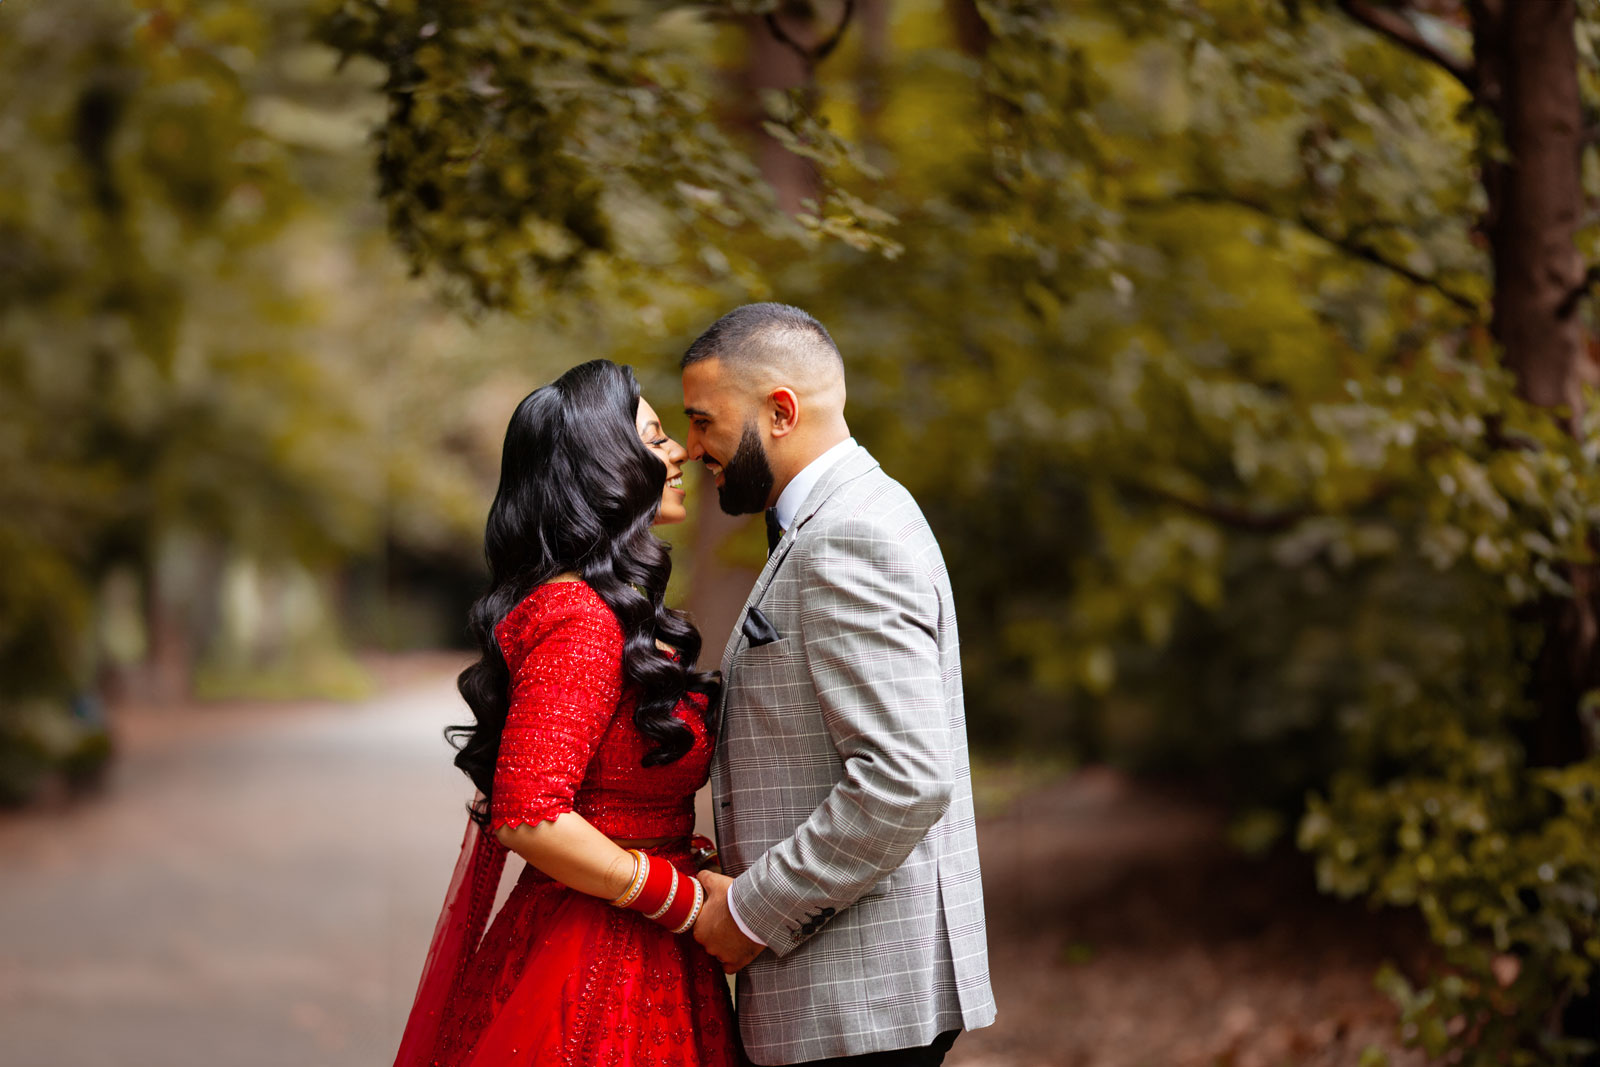 Asian Wedding Photography in the Park Woods